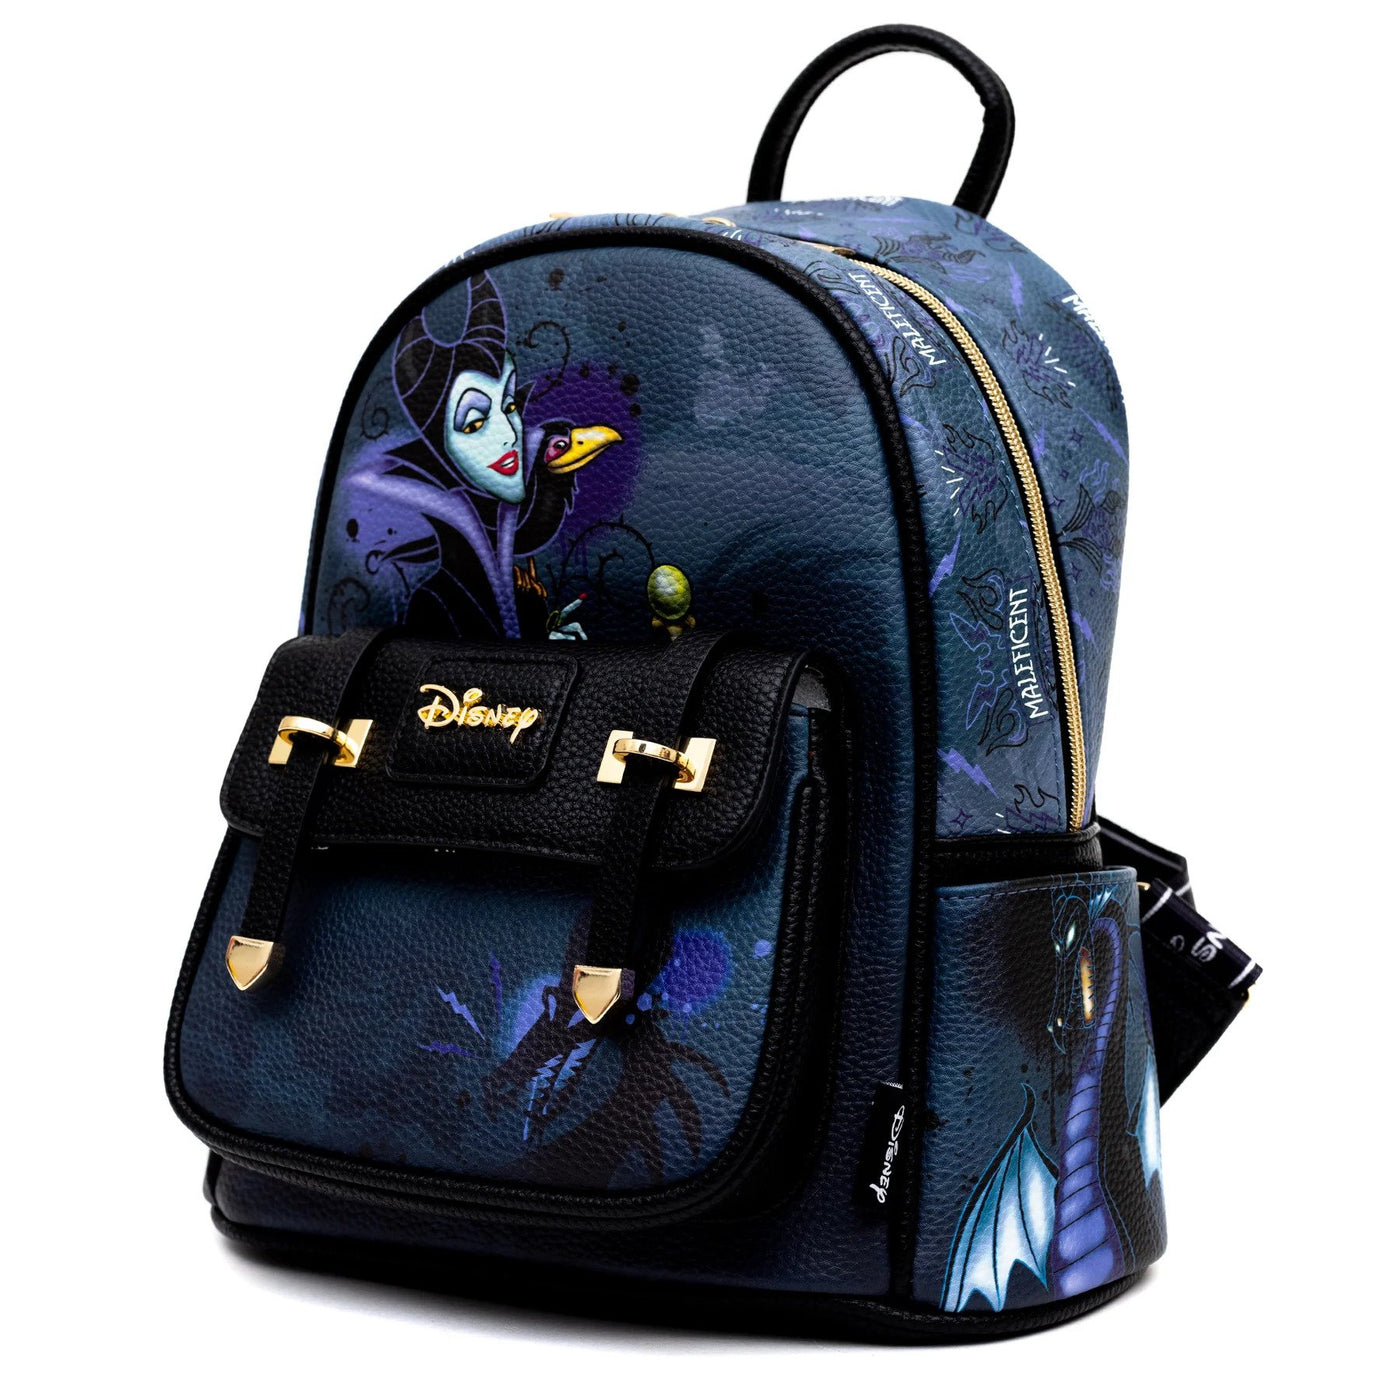 Loungefly Disney Maleficent Dragon Sequin Mini Backpack